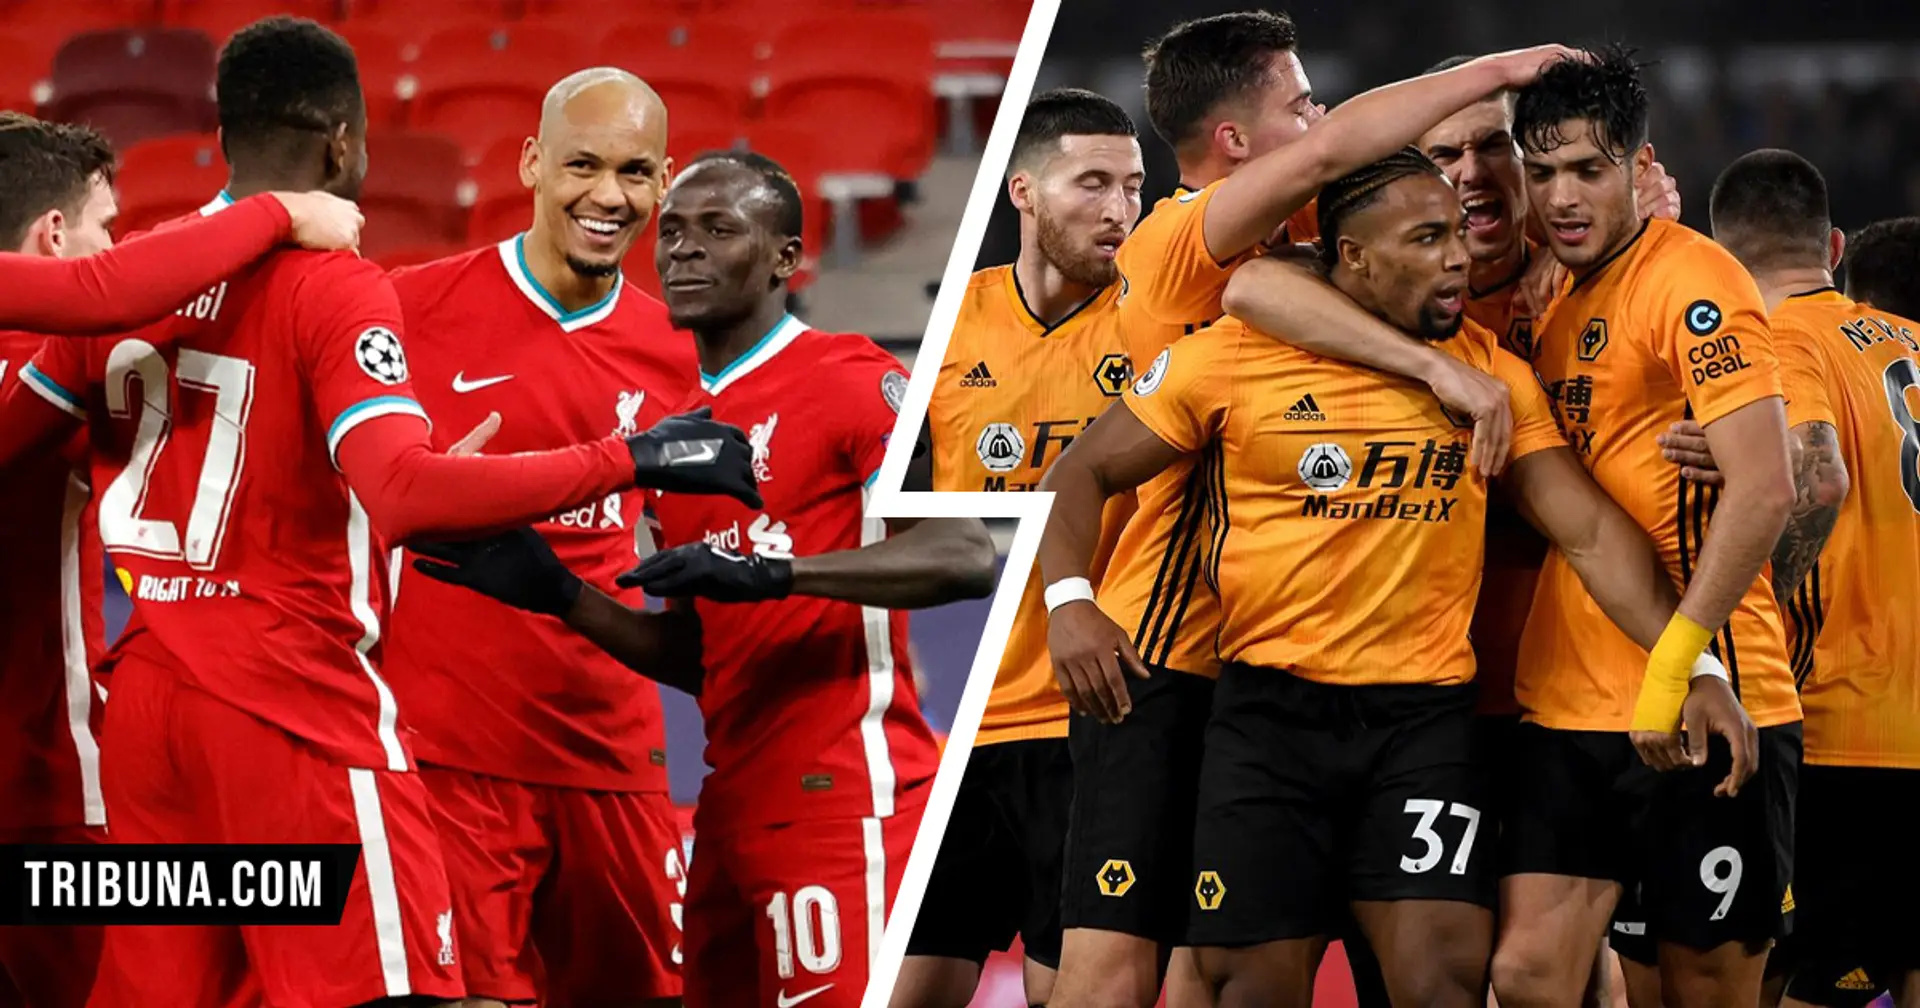 Wolves vs Liverpool: Team news, probable line-ups, score predictions, and more - preview